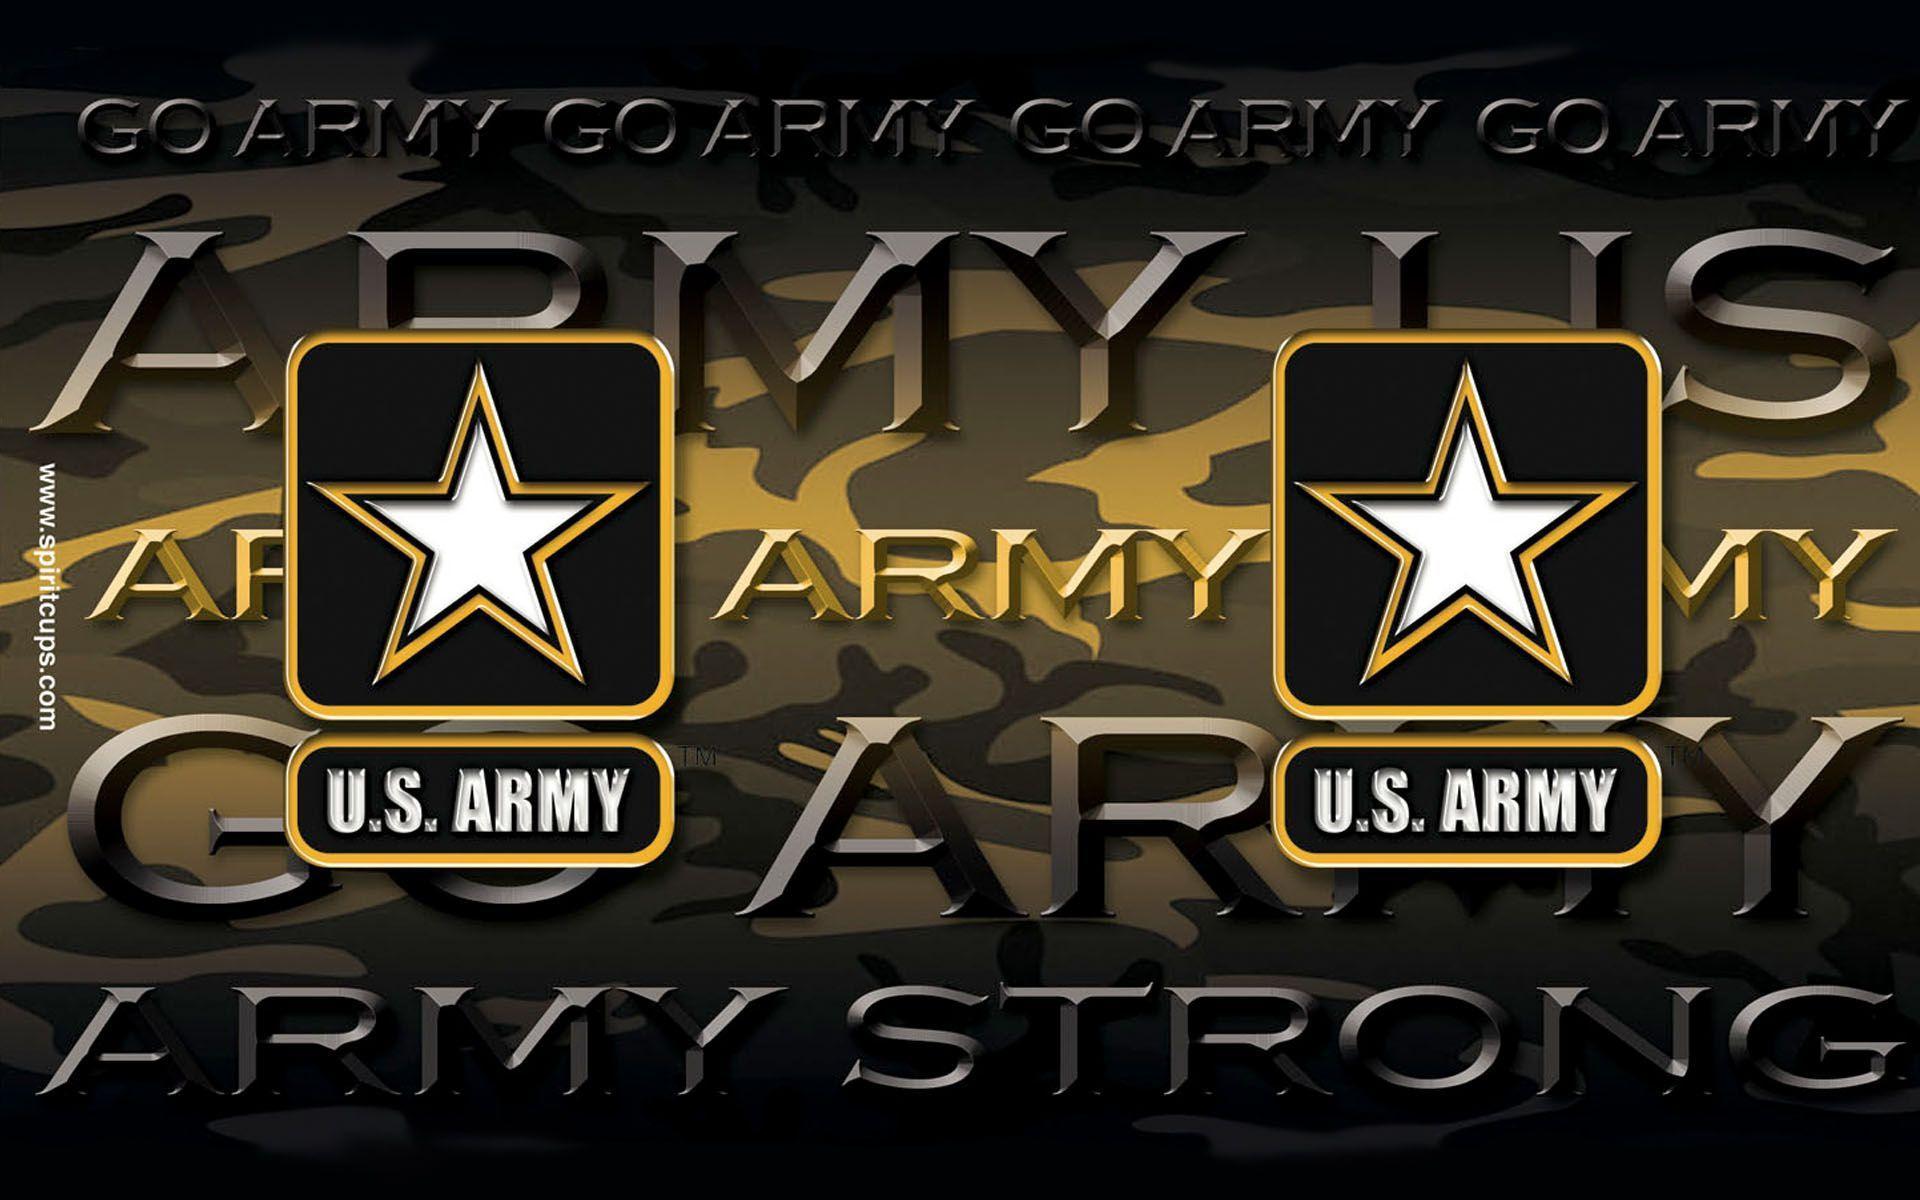 US Army wallpaper by Xwalls  Download on ZEDGE  5c2f